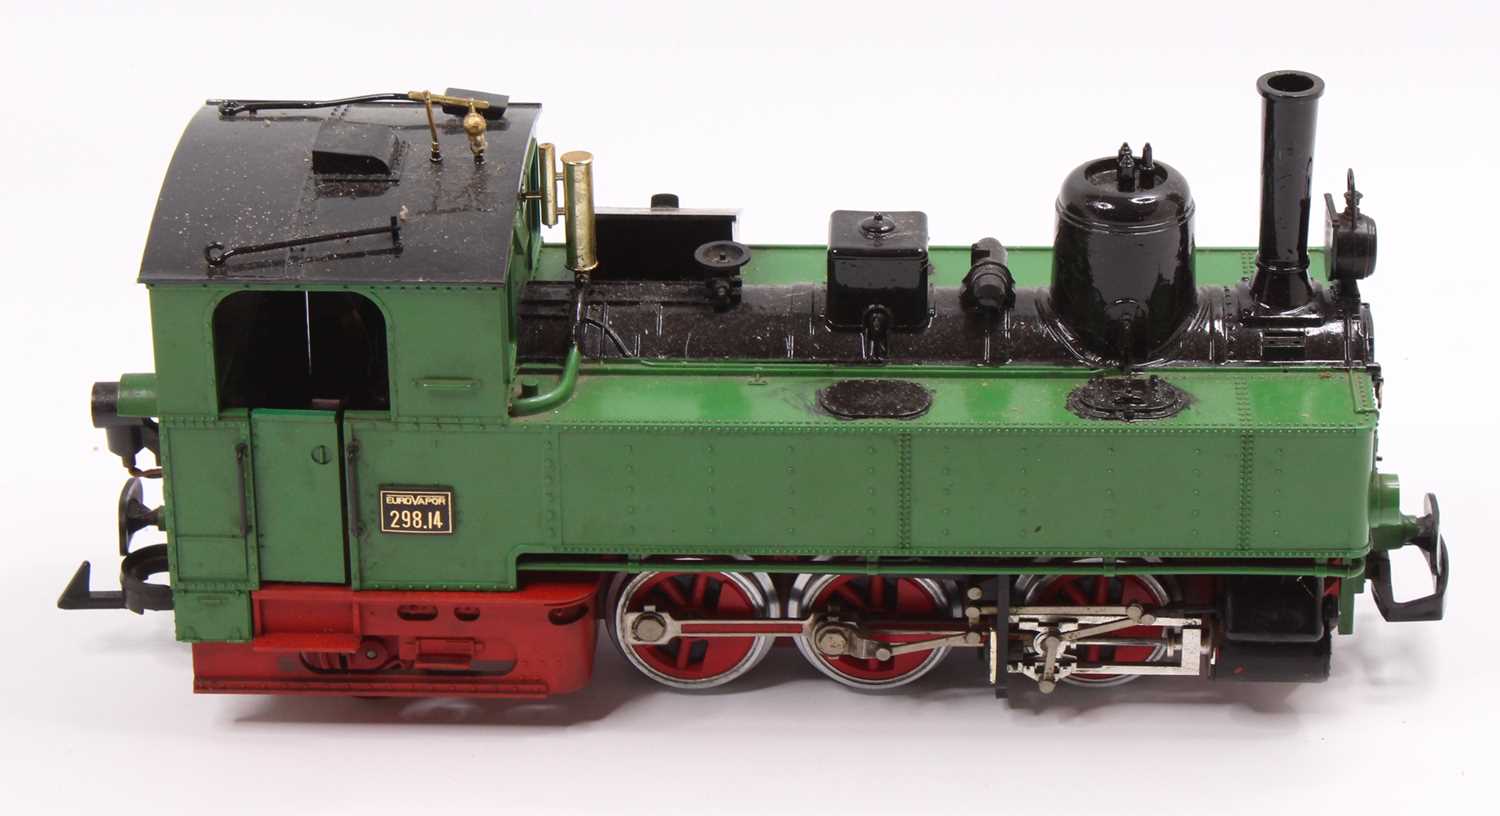 LGB no. 2073 0-6-2 loco running no. 298.14, red chassis green cab, model has been overpainted - Image 6 of 10